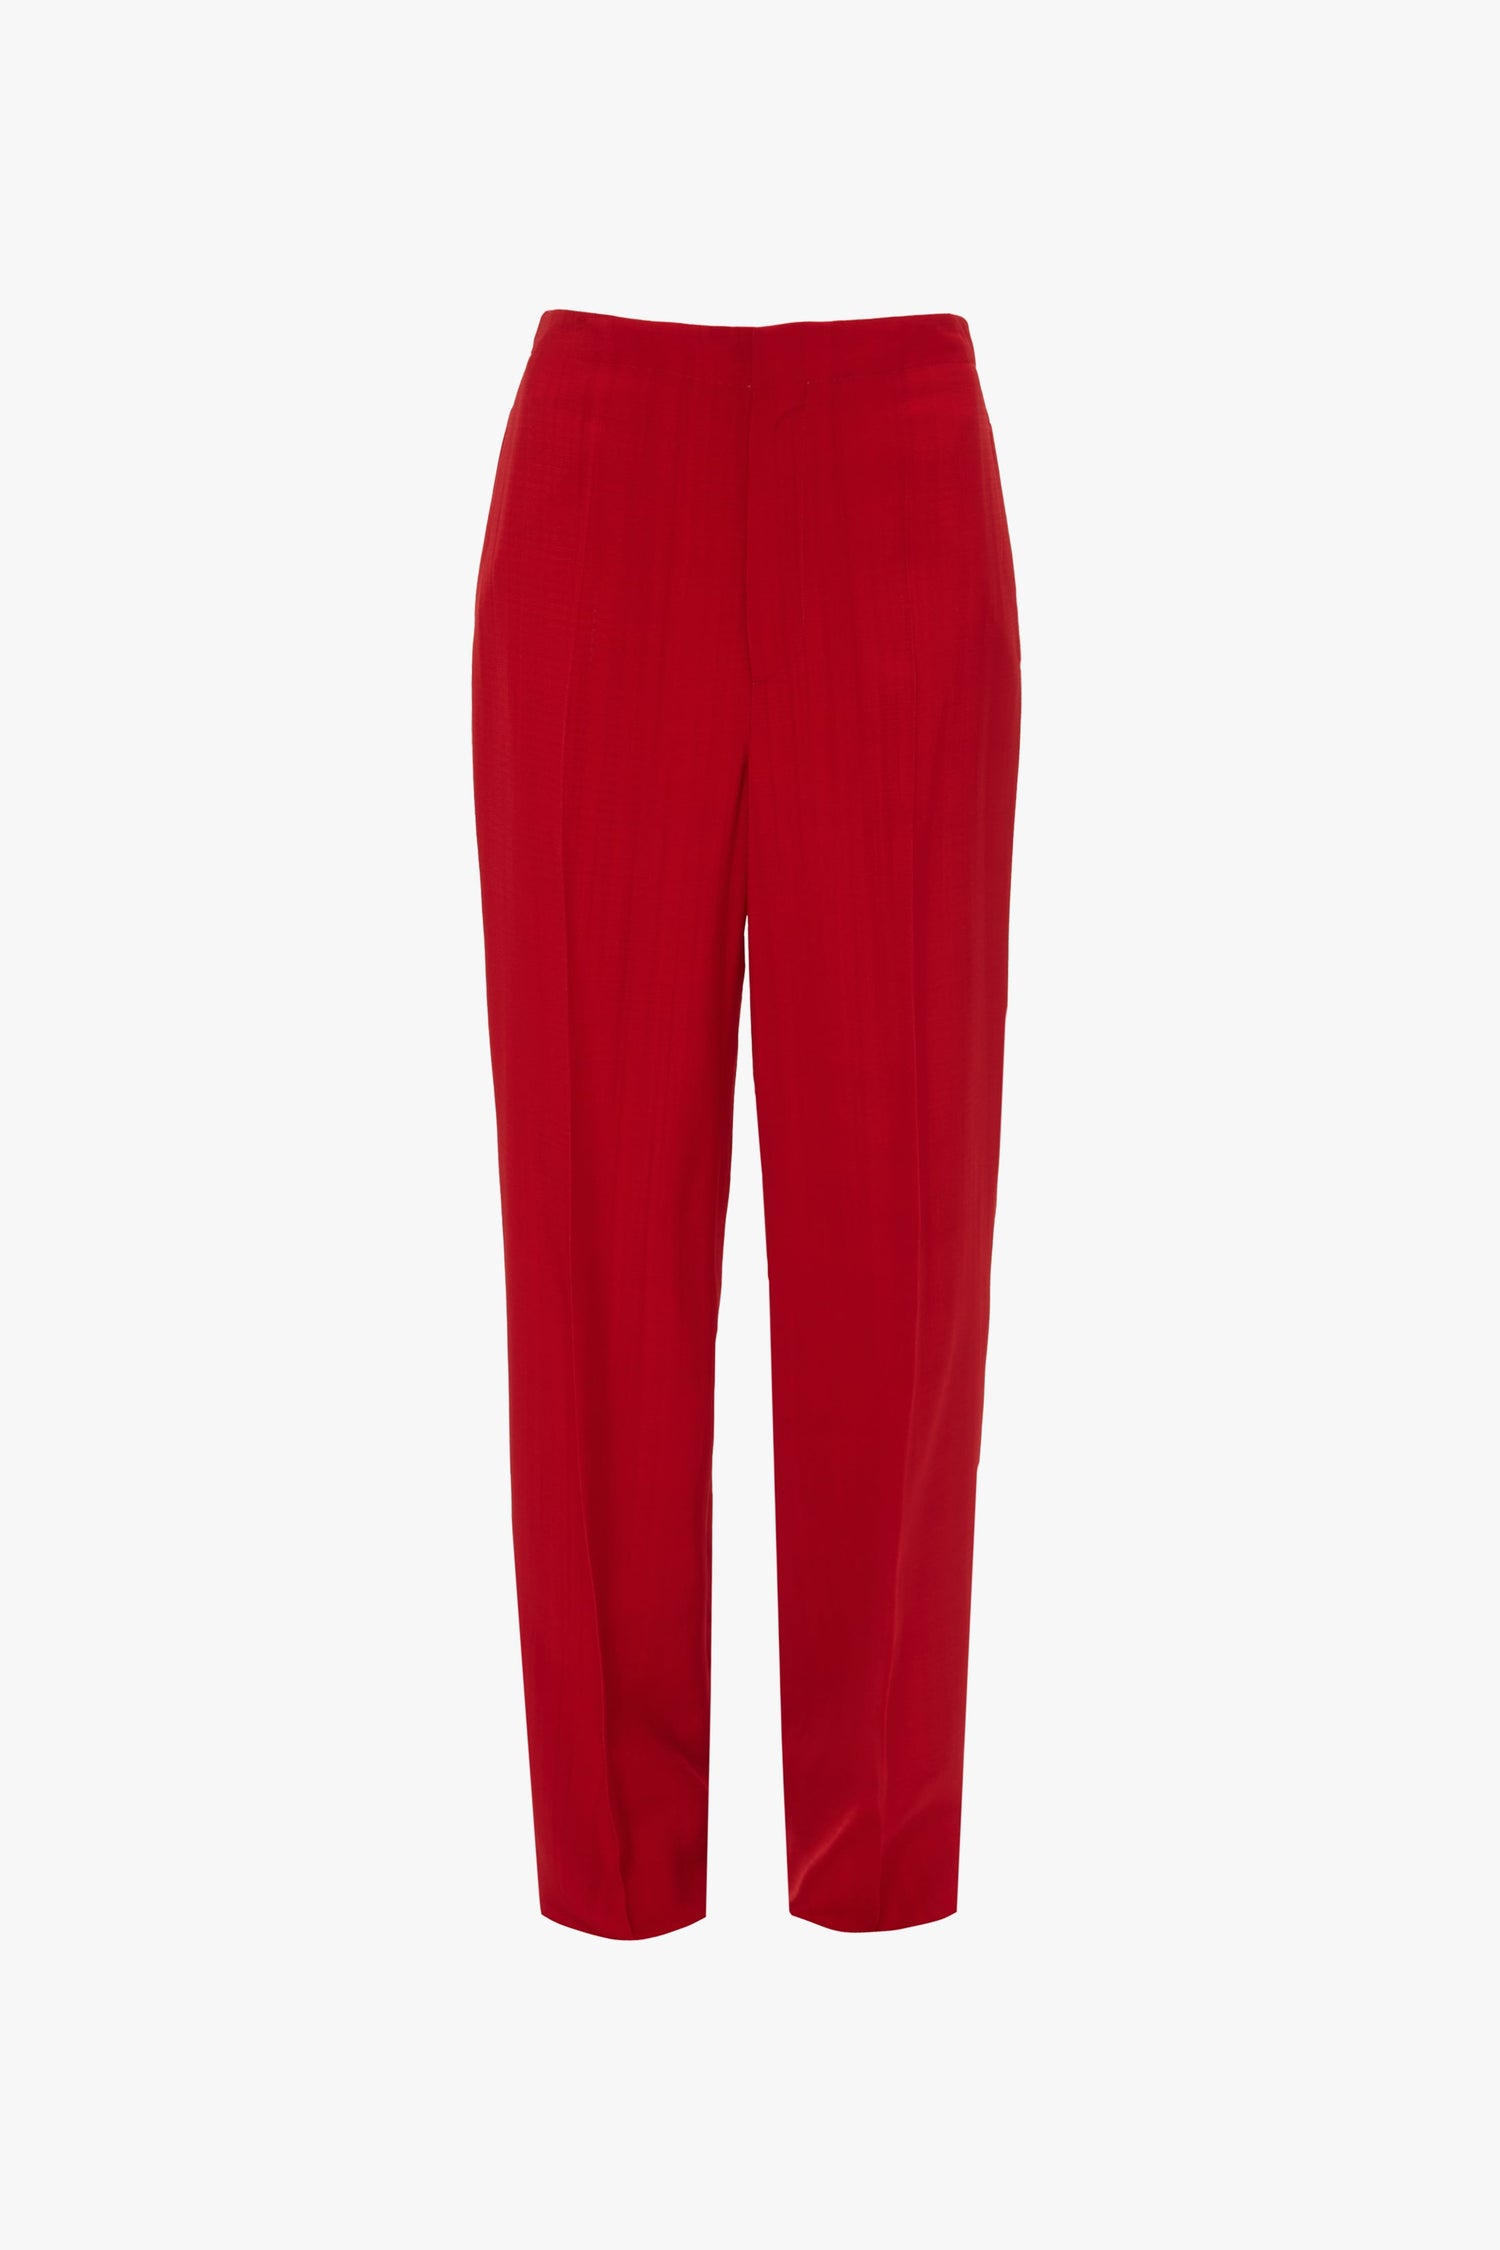 Tapered Leg Trouser In Carmine by Victoria Beckham with a straight-leg cut, traditional tailoring, and a pleated front.